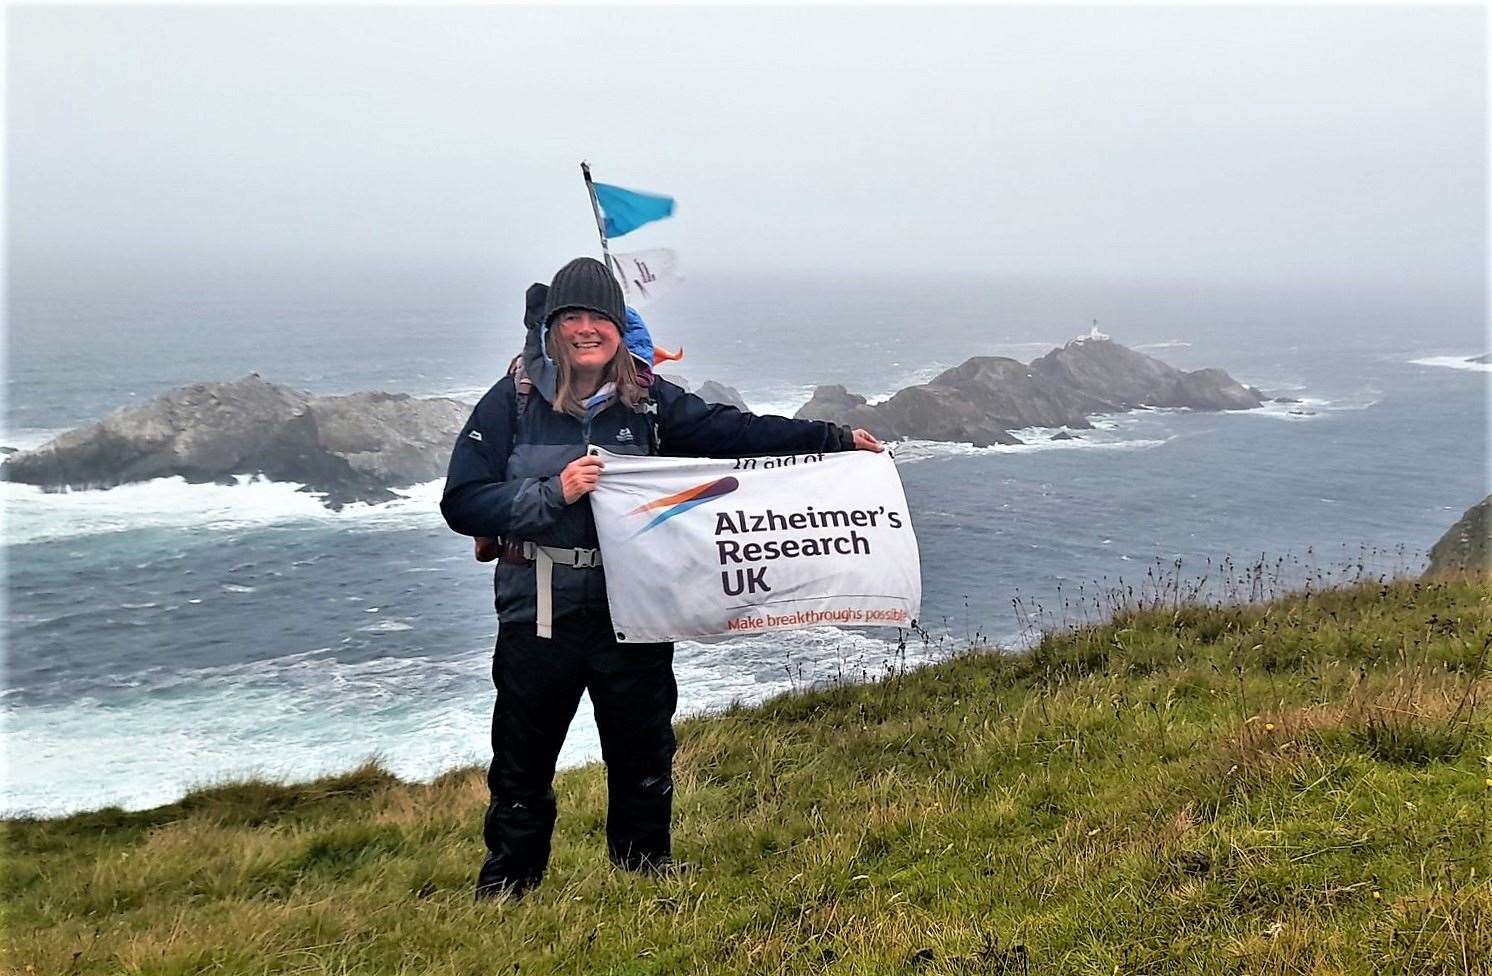 Karen Penny reaches her final destination having walked 10,500 miles and covered the entire UK and Irish coastline.